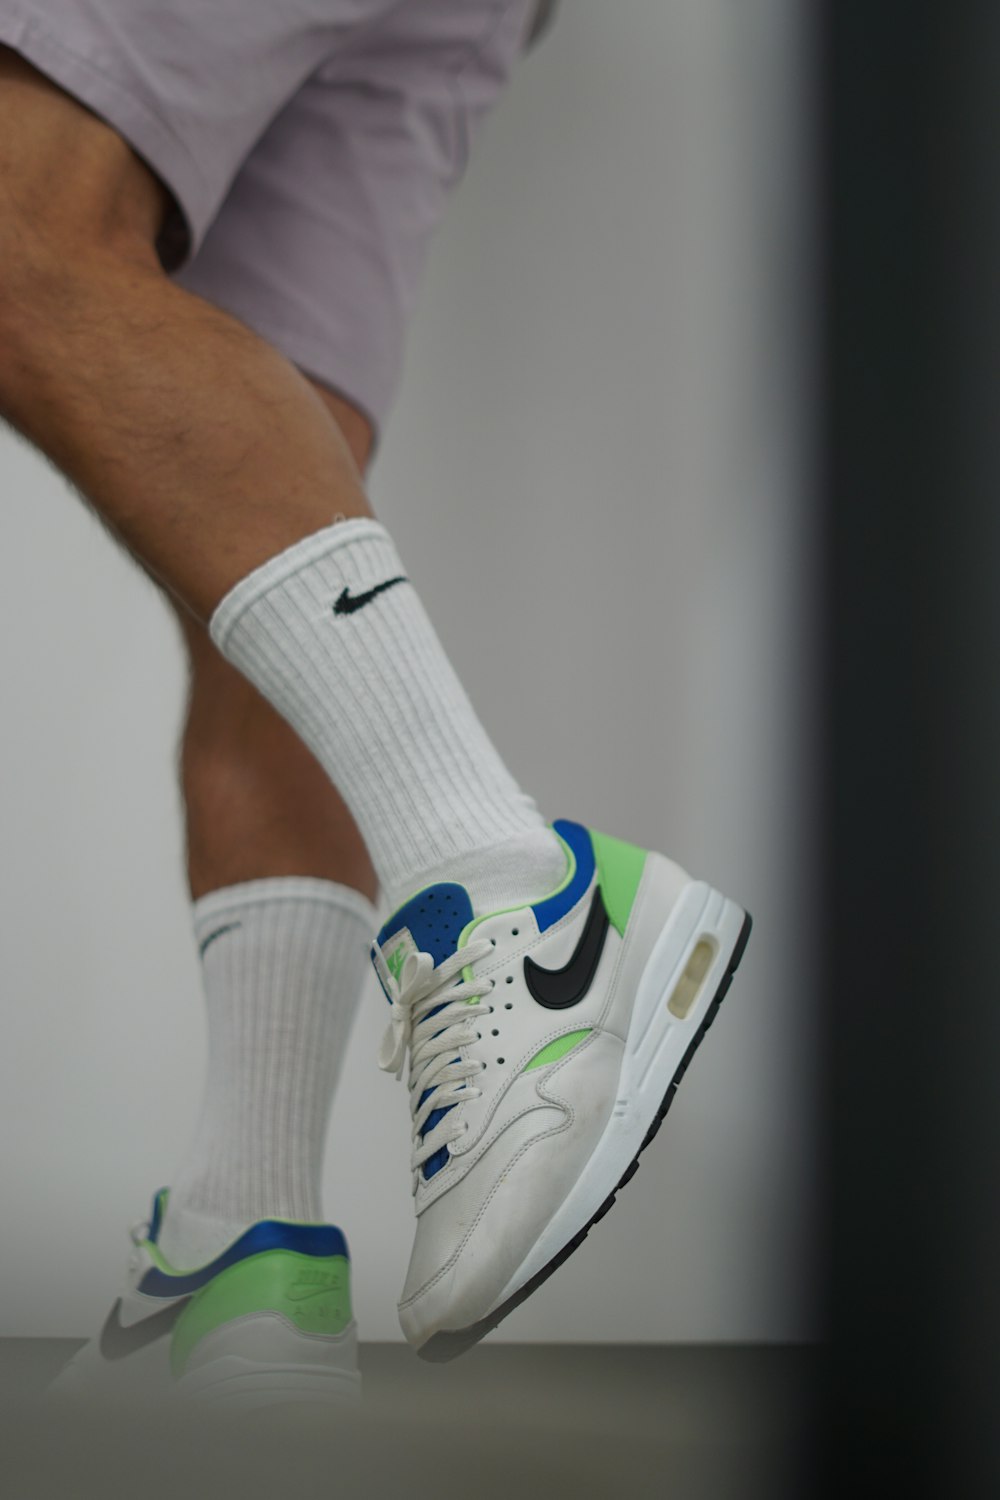 a close up of a person's feet with a pair of tennis shoes